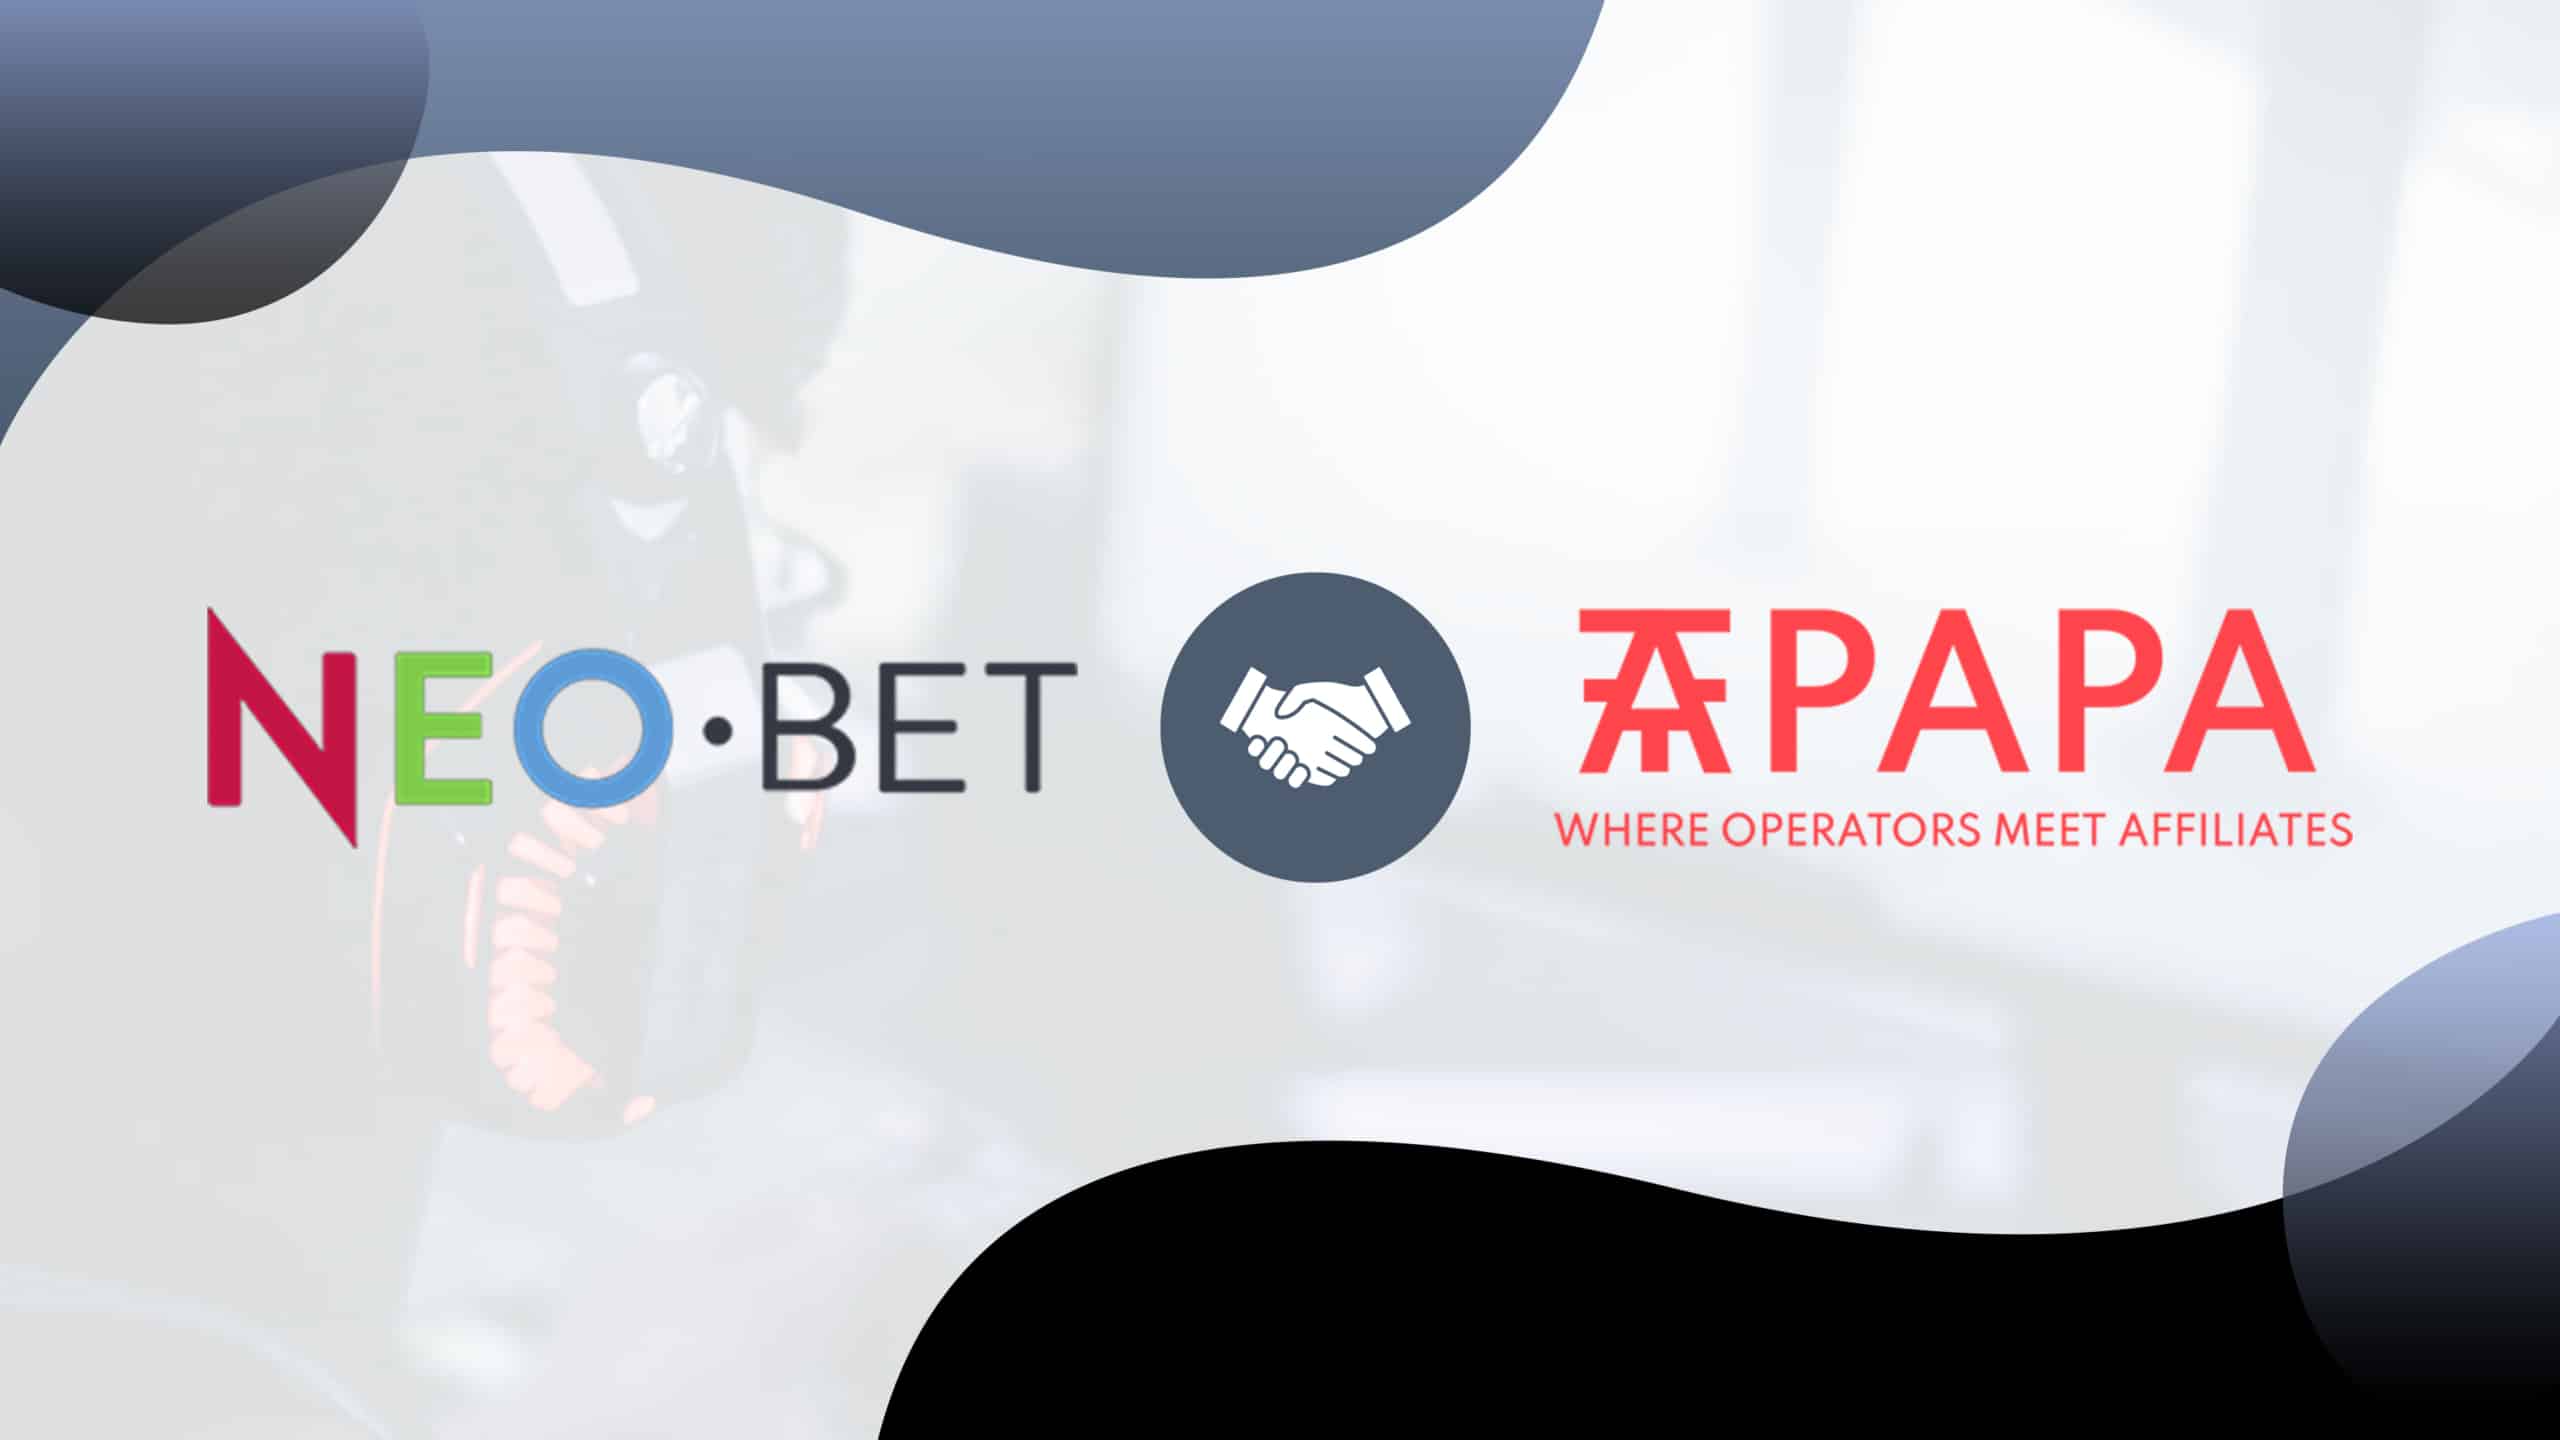 AffPapa announces latest partnership with NeoBet